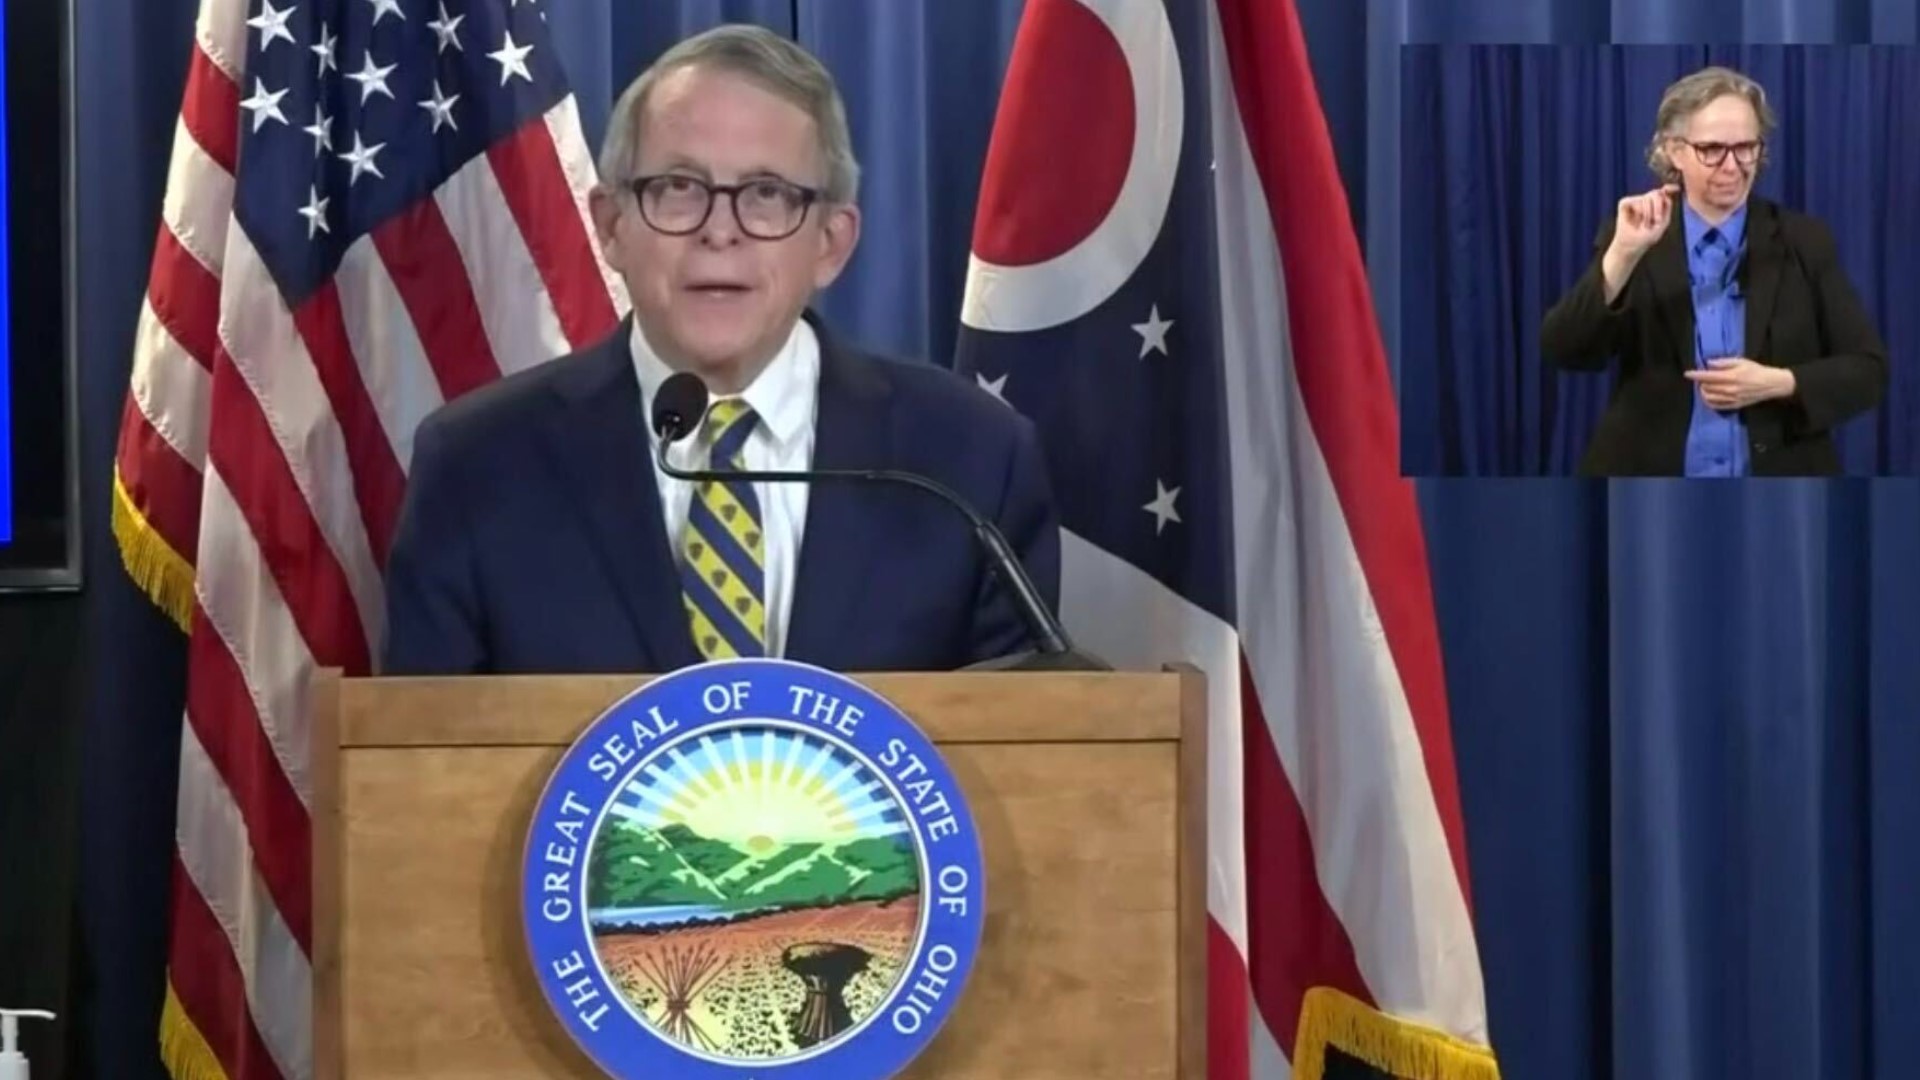 DeWine singled out Sarah Ackman and Michael Murry, saying, 'I rely on them every single day.'